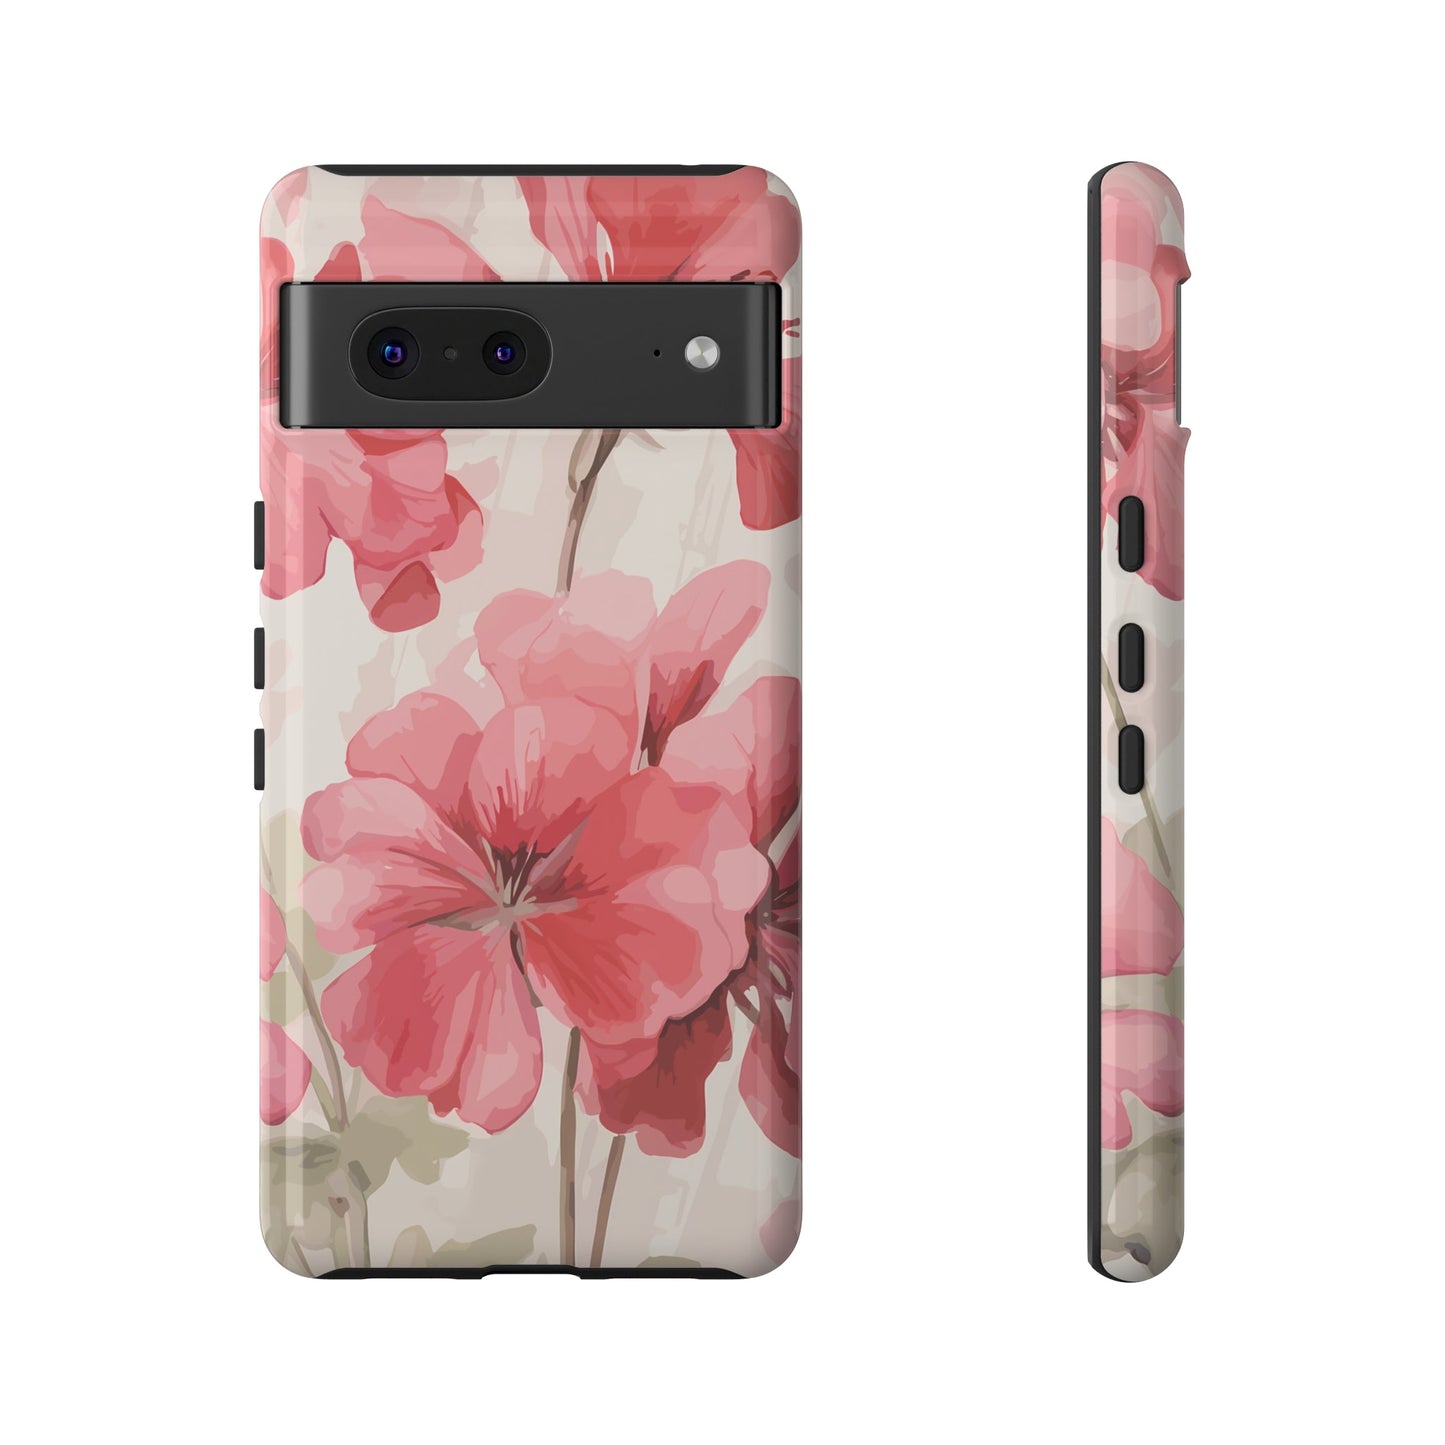 MagSafe iPhone Case Floral - Watercolor Floral Design - Cheerful Lane